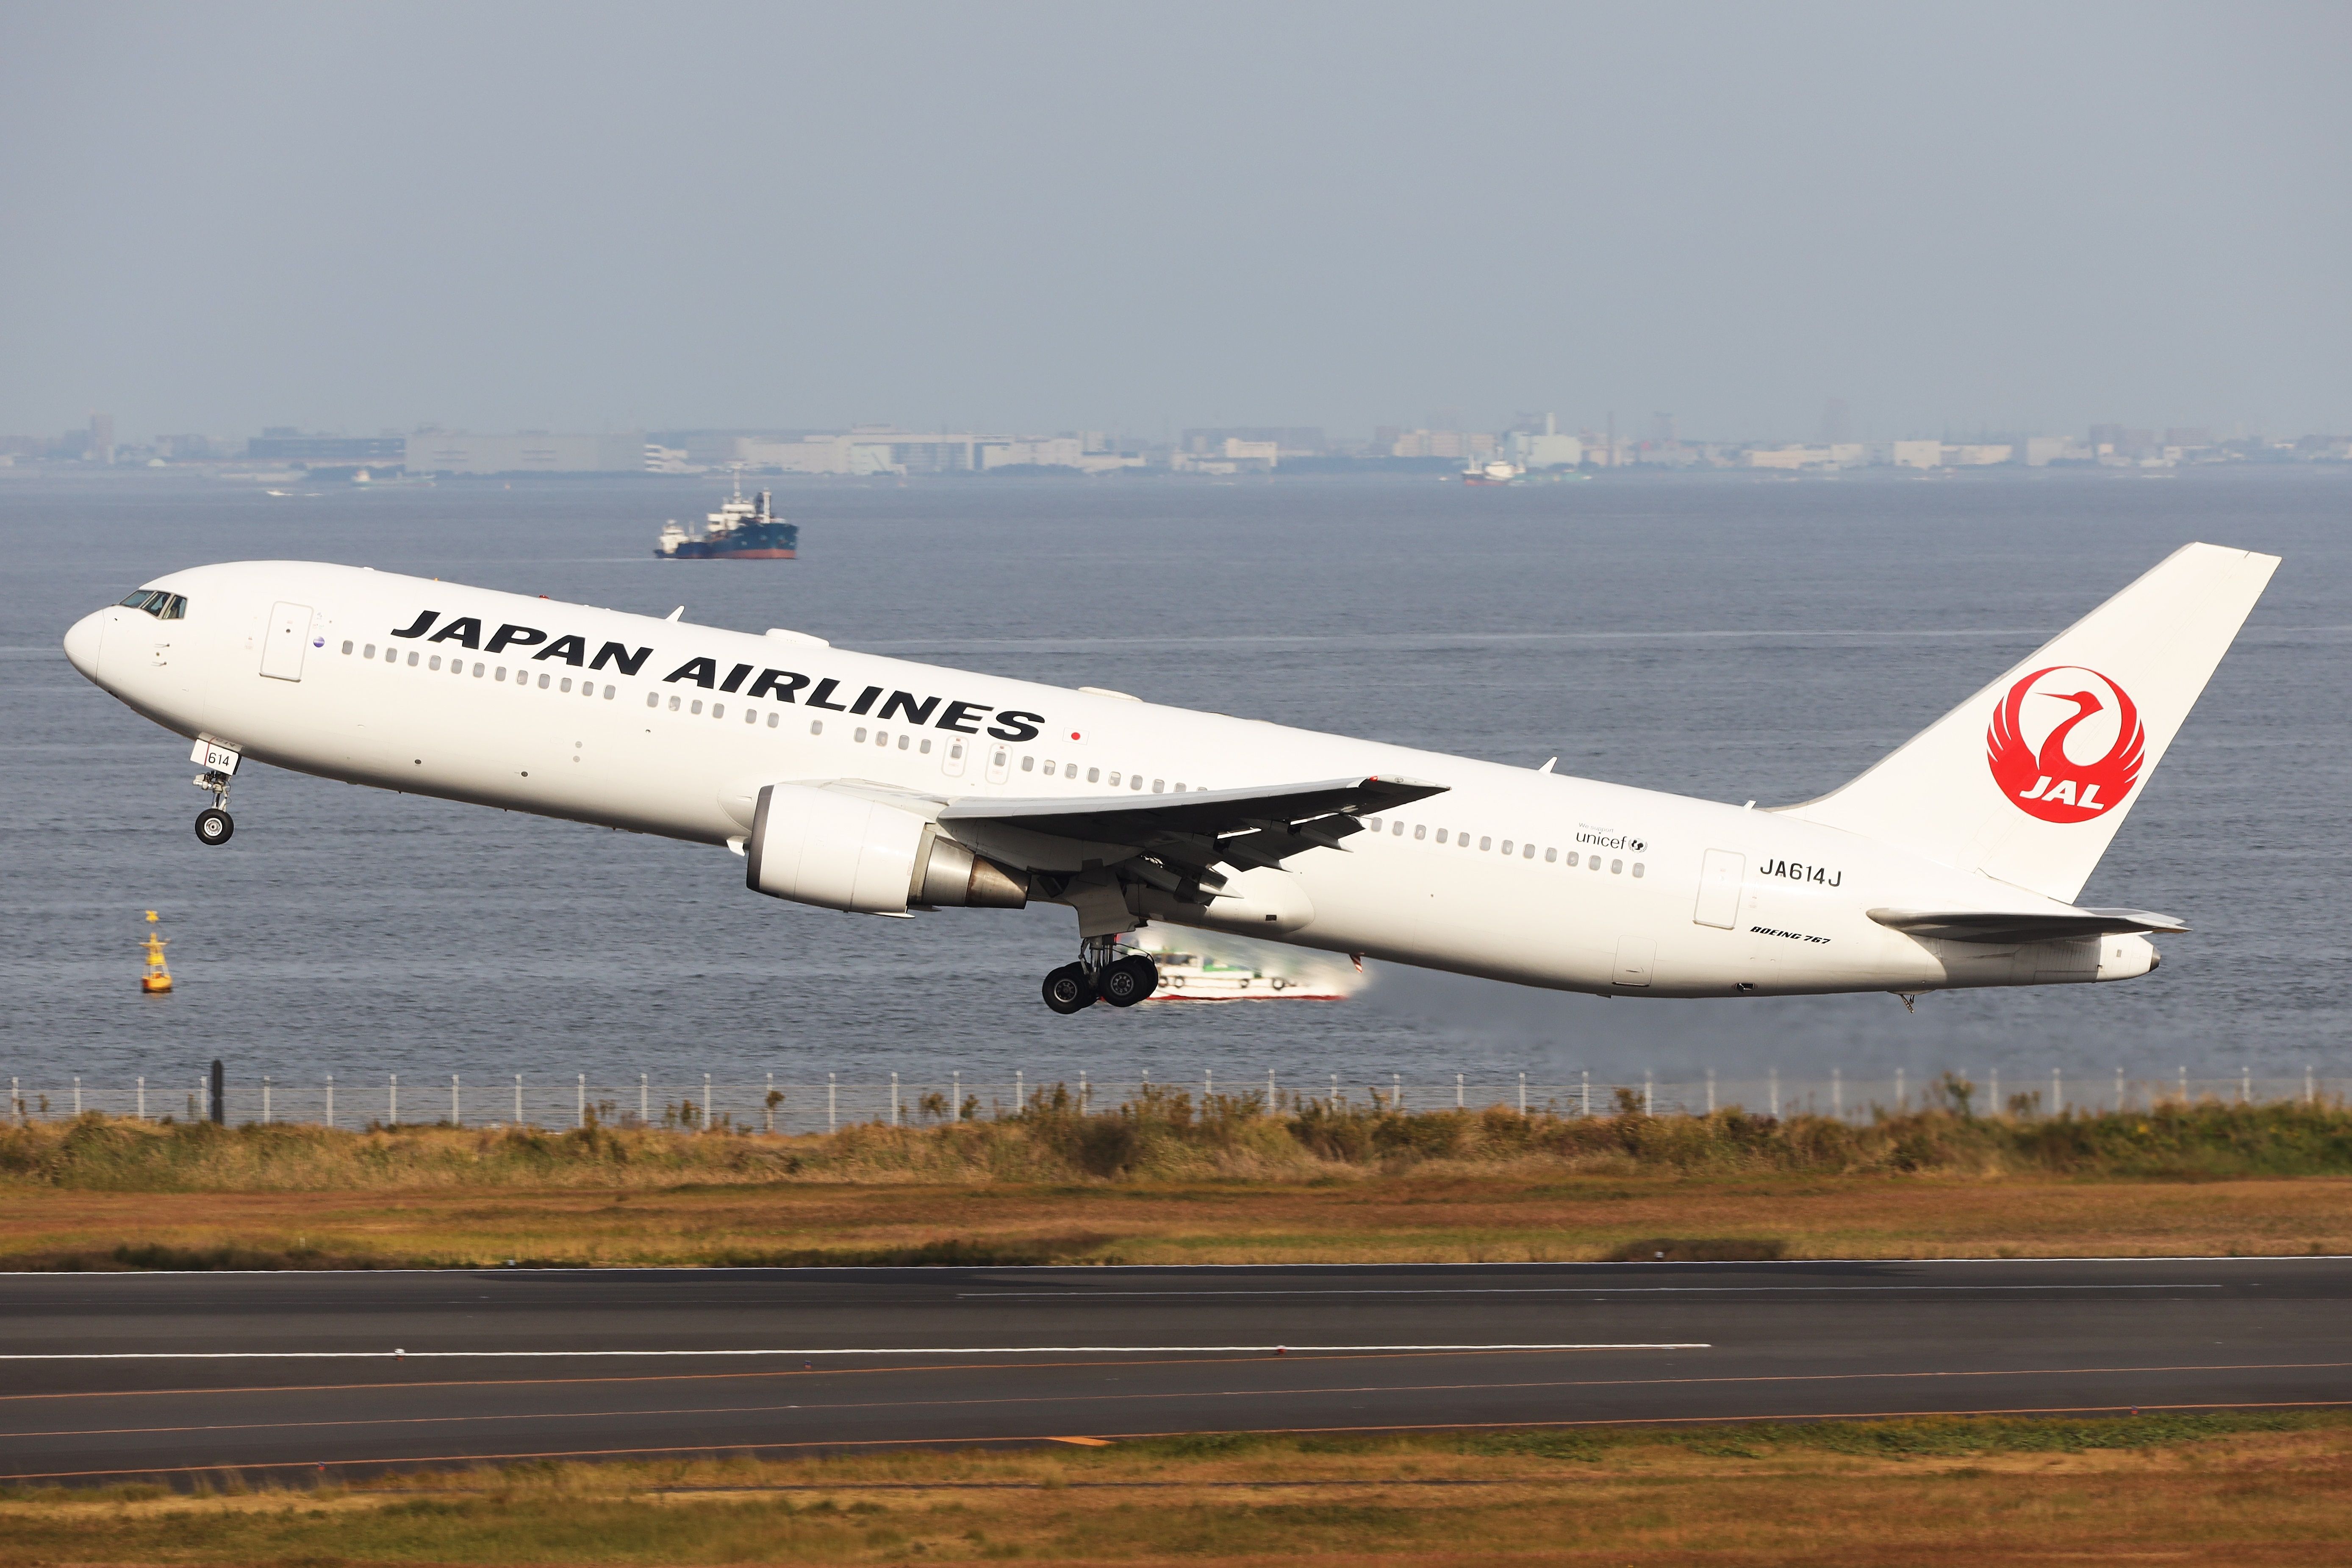 A Japan Airlines taking off from Tokyo Haneda Airport.